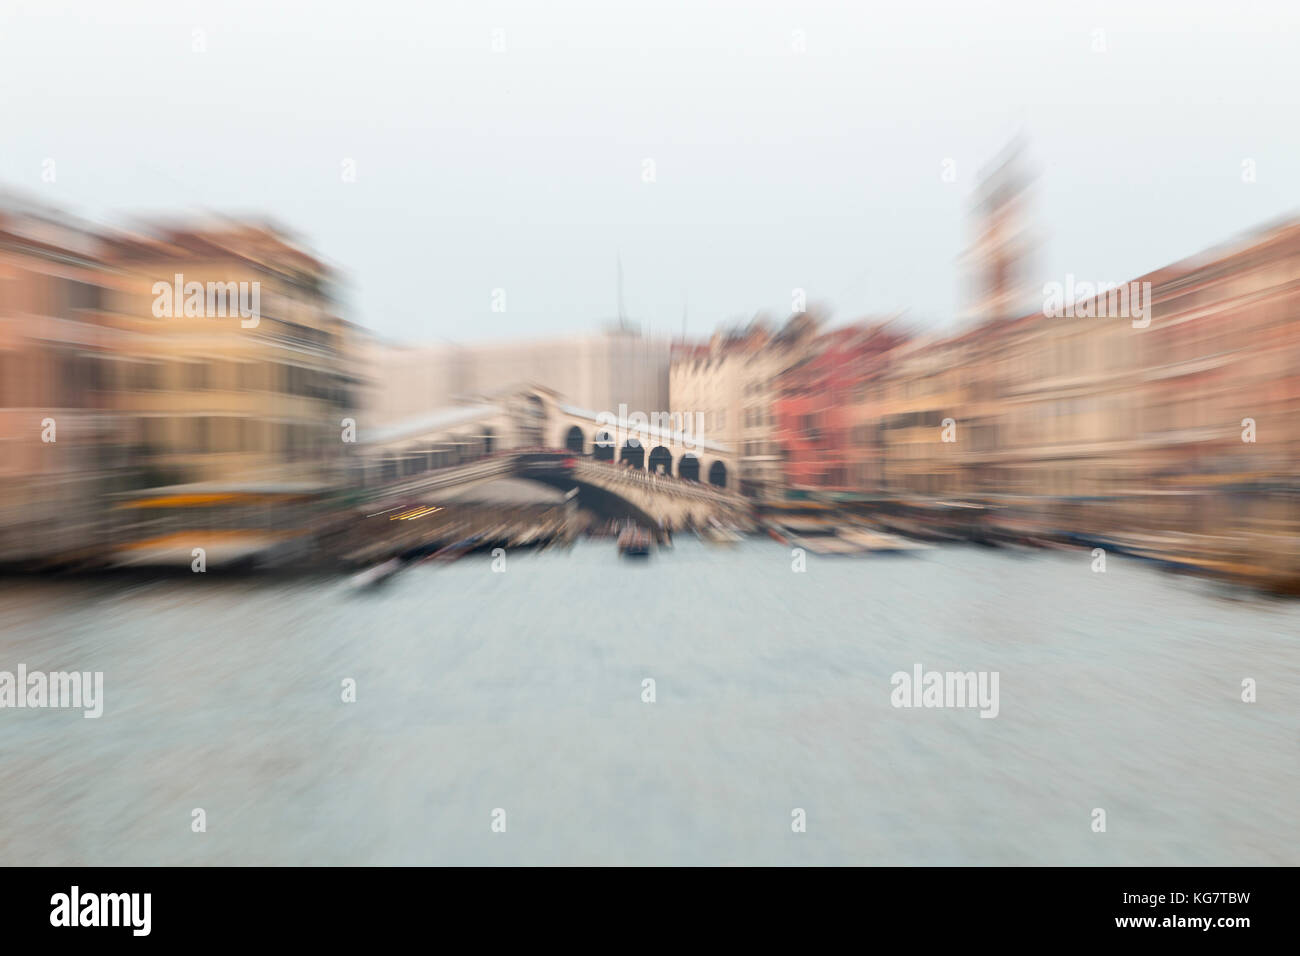 Italy, Venice, zoomed view of the Rialto bridge over the Grand Canal. Stock Photo